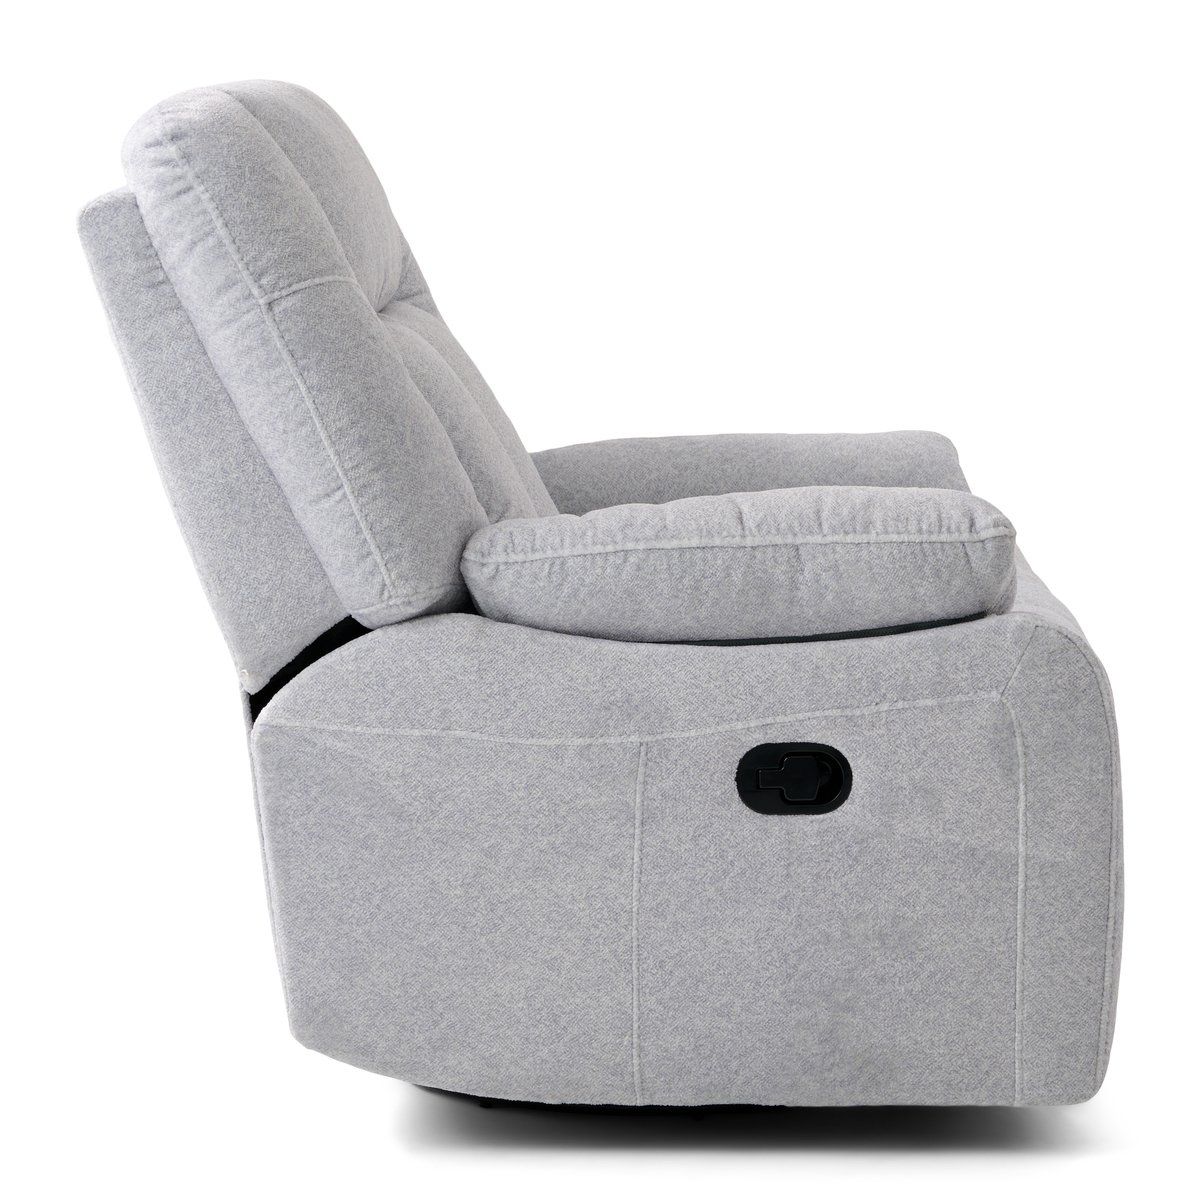 Picture of Tweed Swivel Glider Recliner